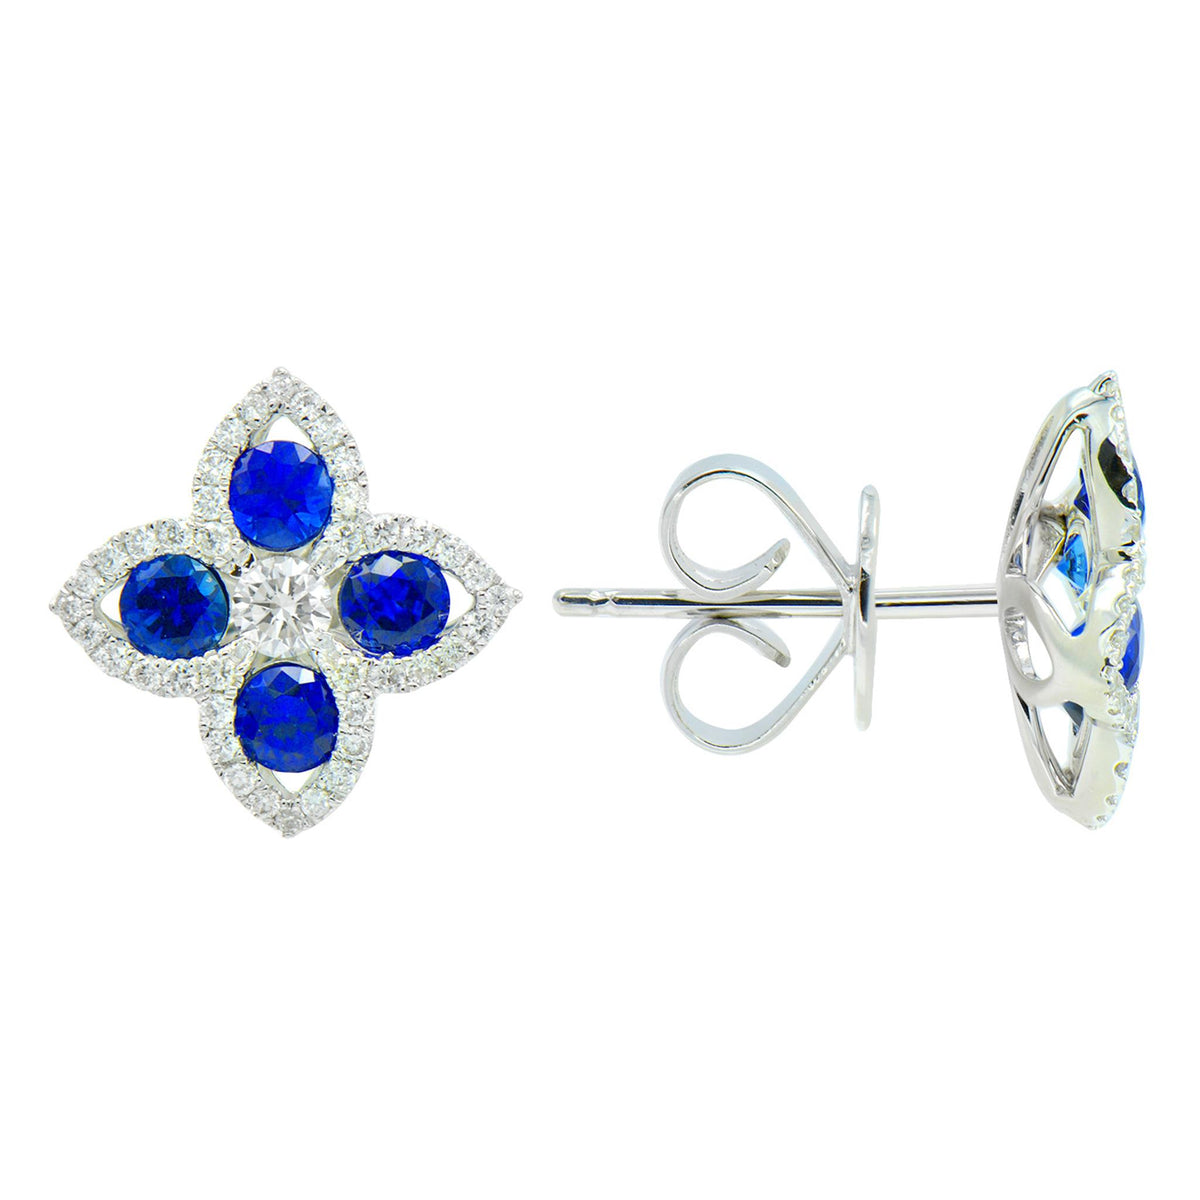 14Kt White Gold Classic Stud Earrings Gemstone Earrings With 0.78ct Sapphires